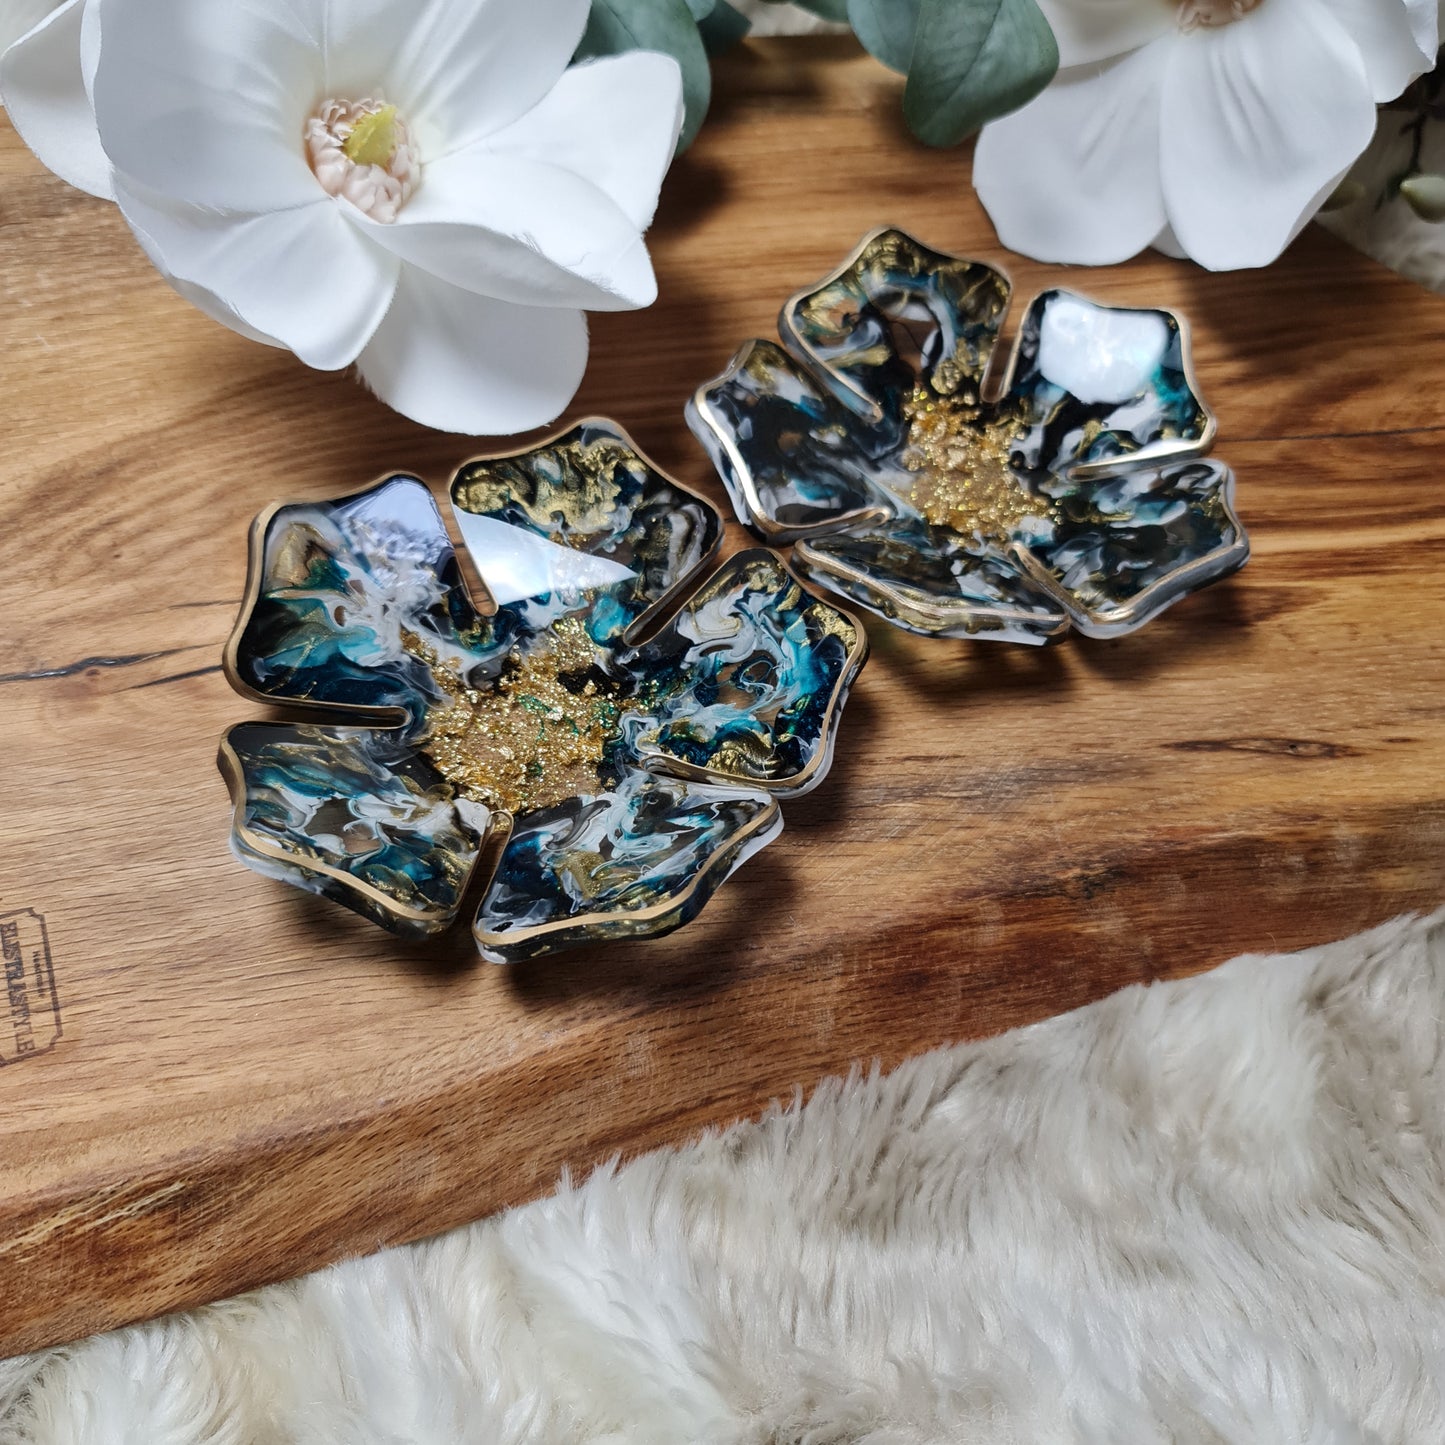 Flower resin small bowl/ jewellery dish in Dark Green, White and Gold